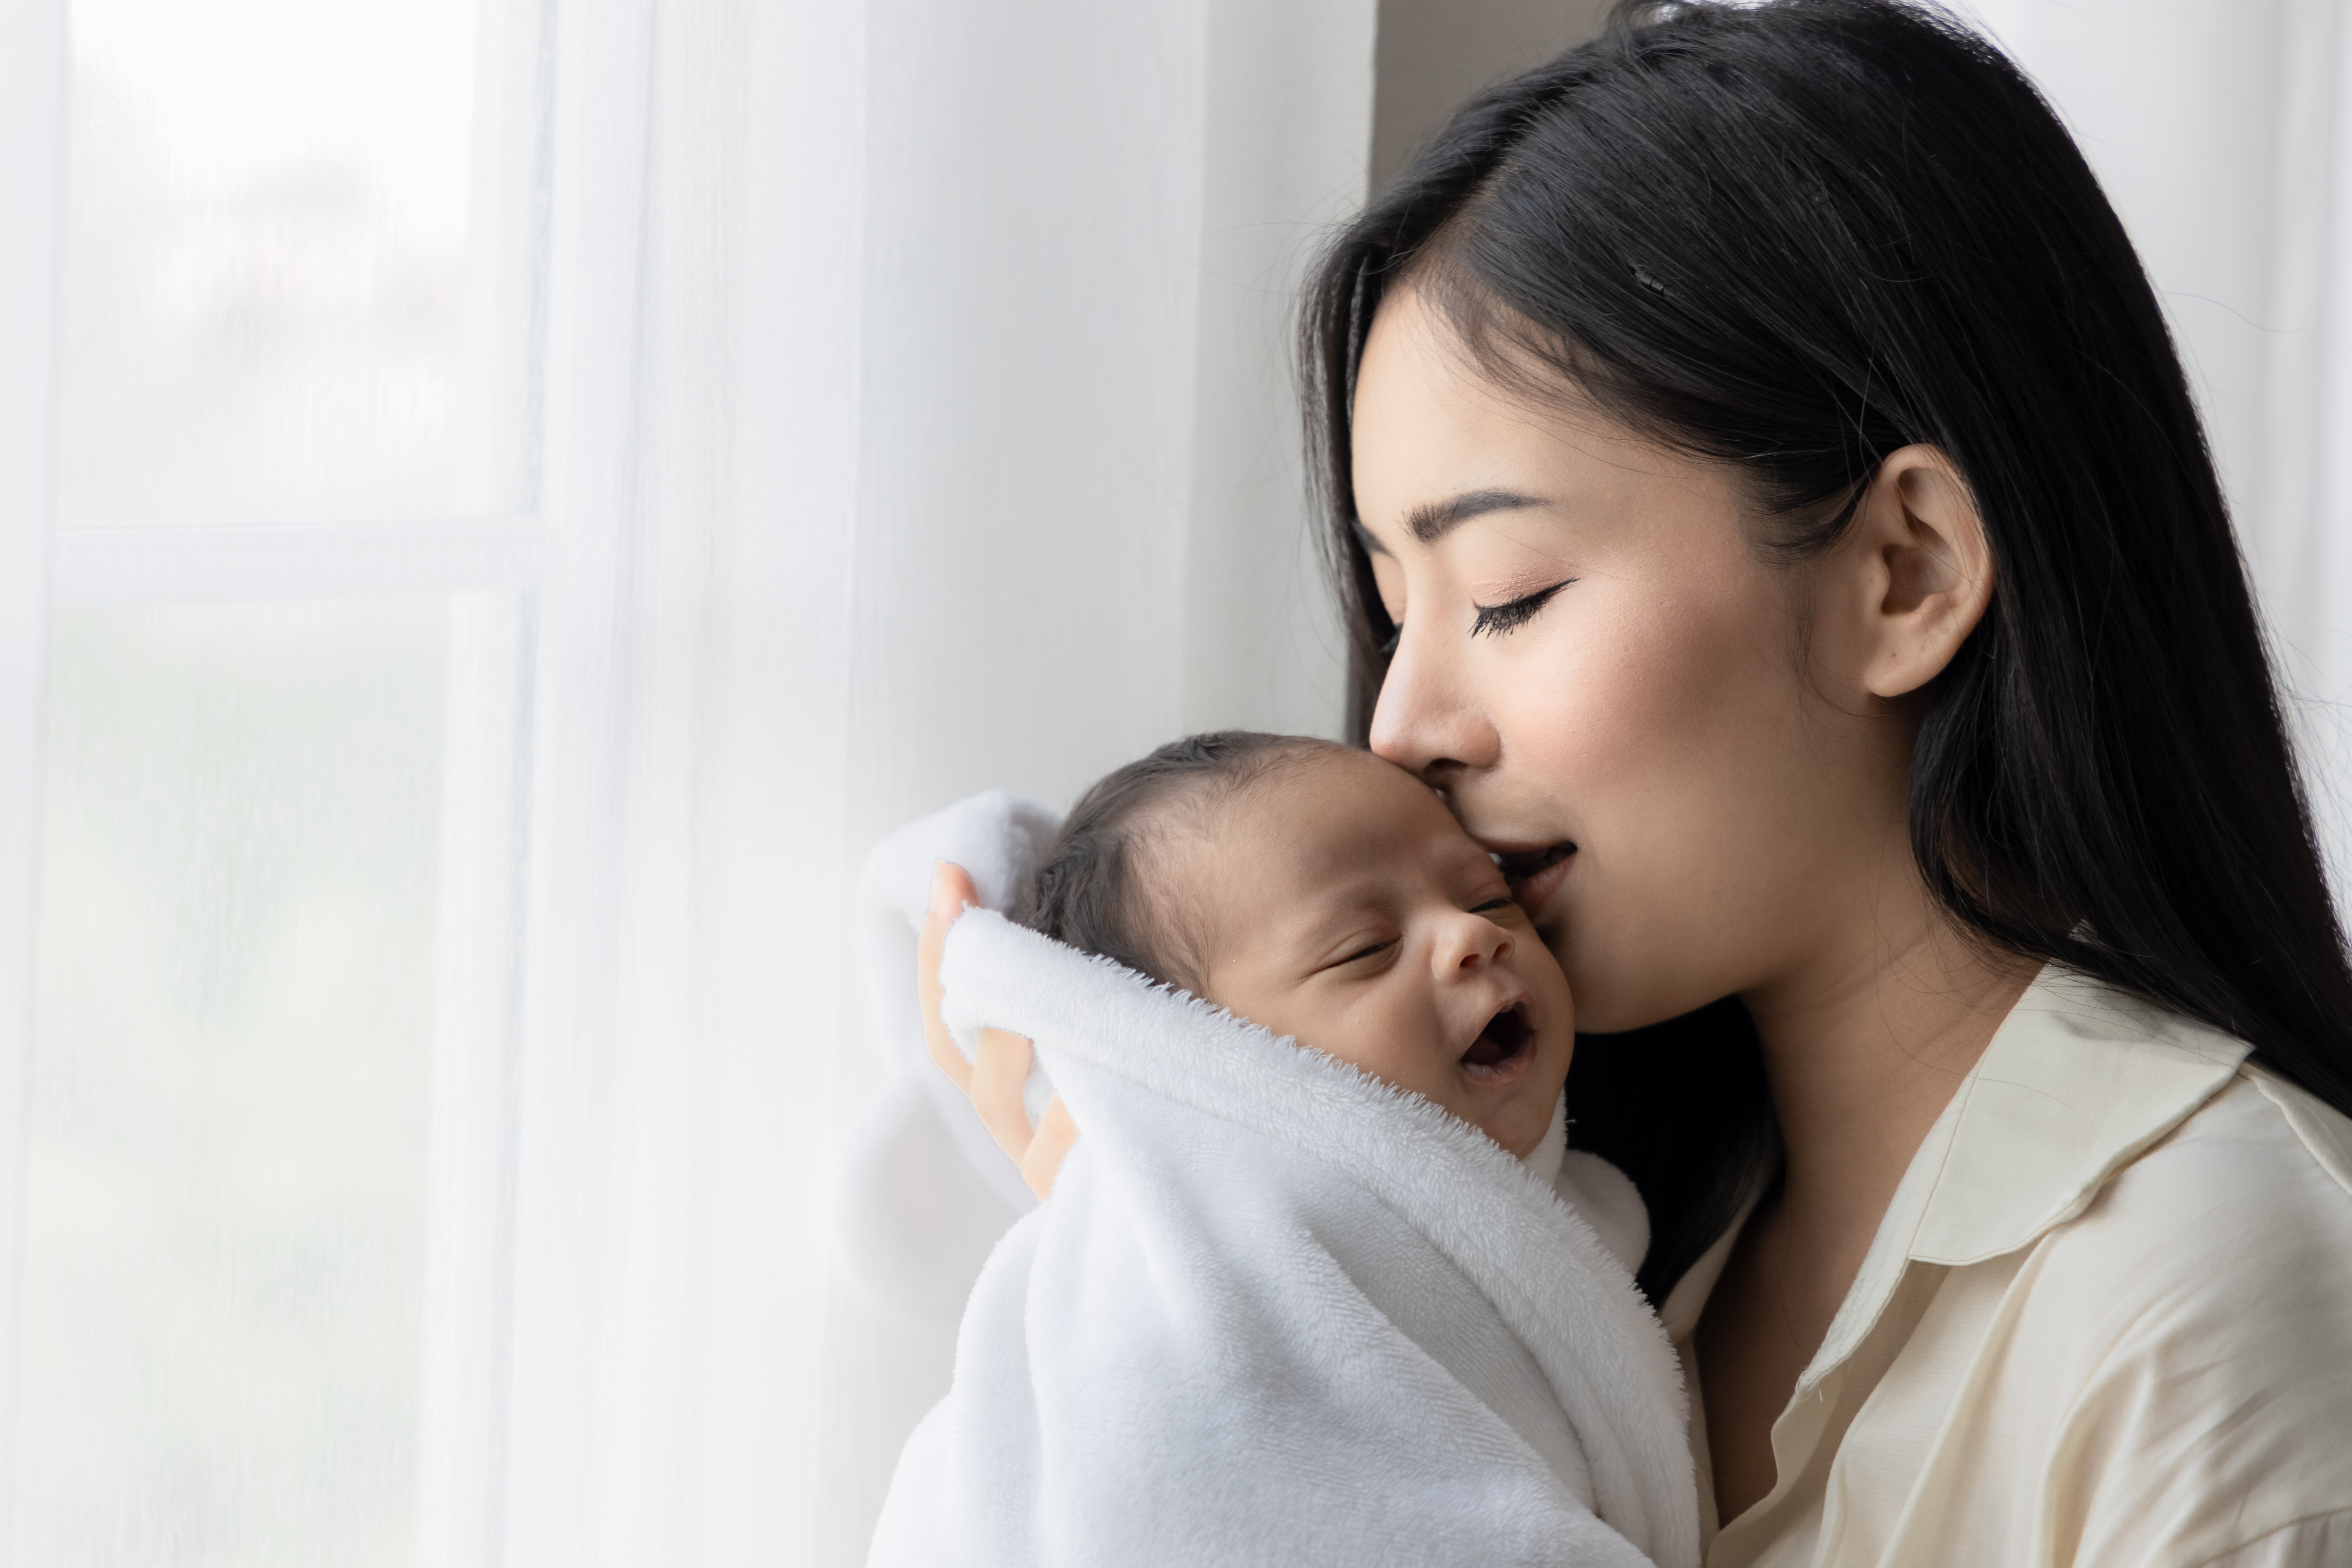 Korean service for mothers and newborns